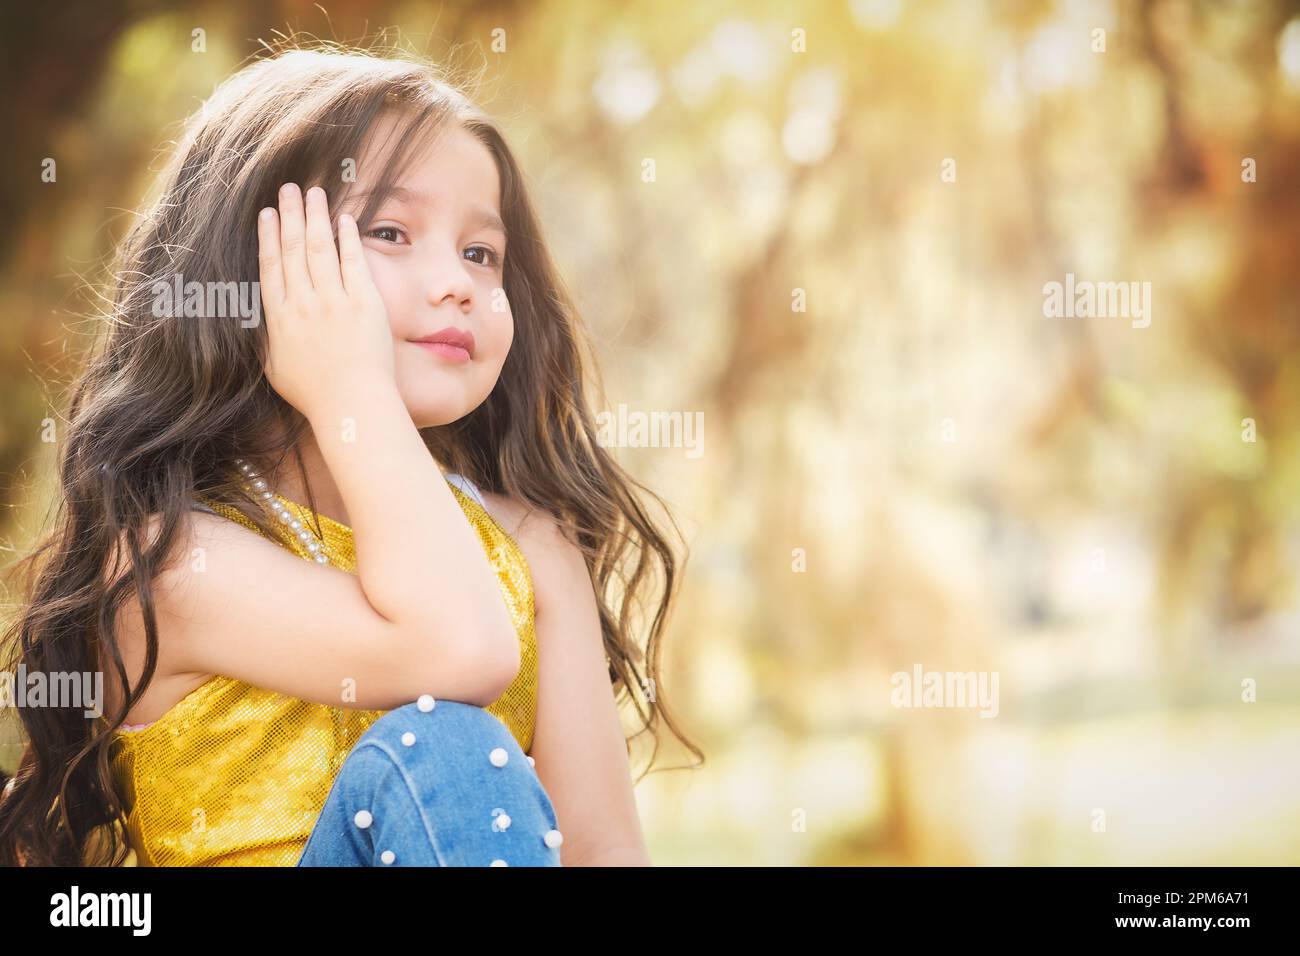 Expressions of happiness. blonde girl sitting in a tree smiles placidly. model girl. children's day theme. Stock Photo